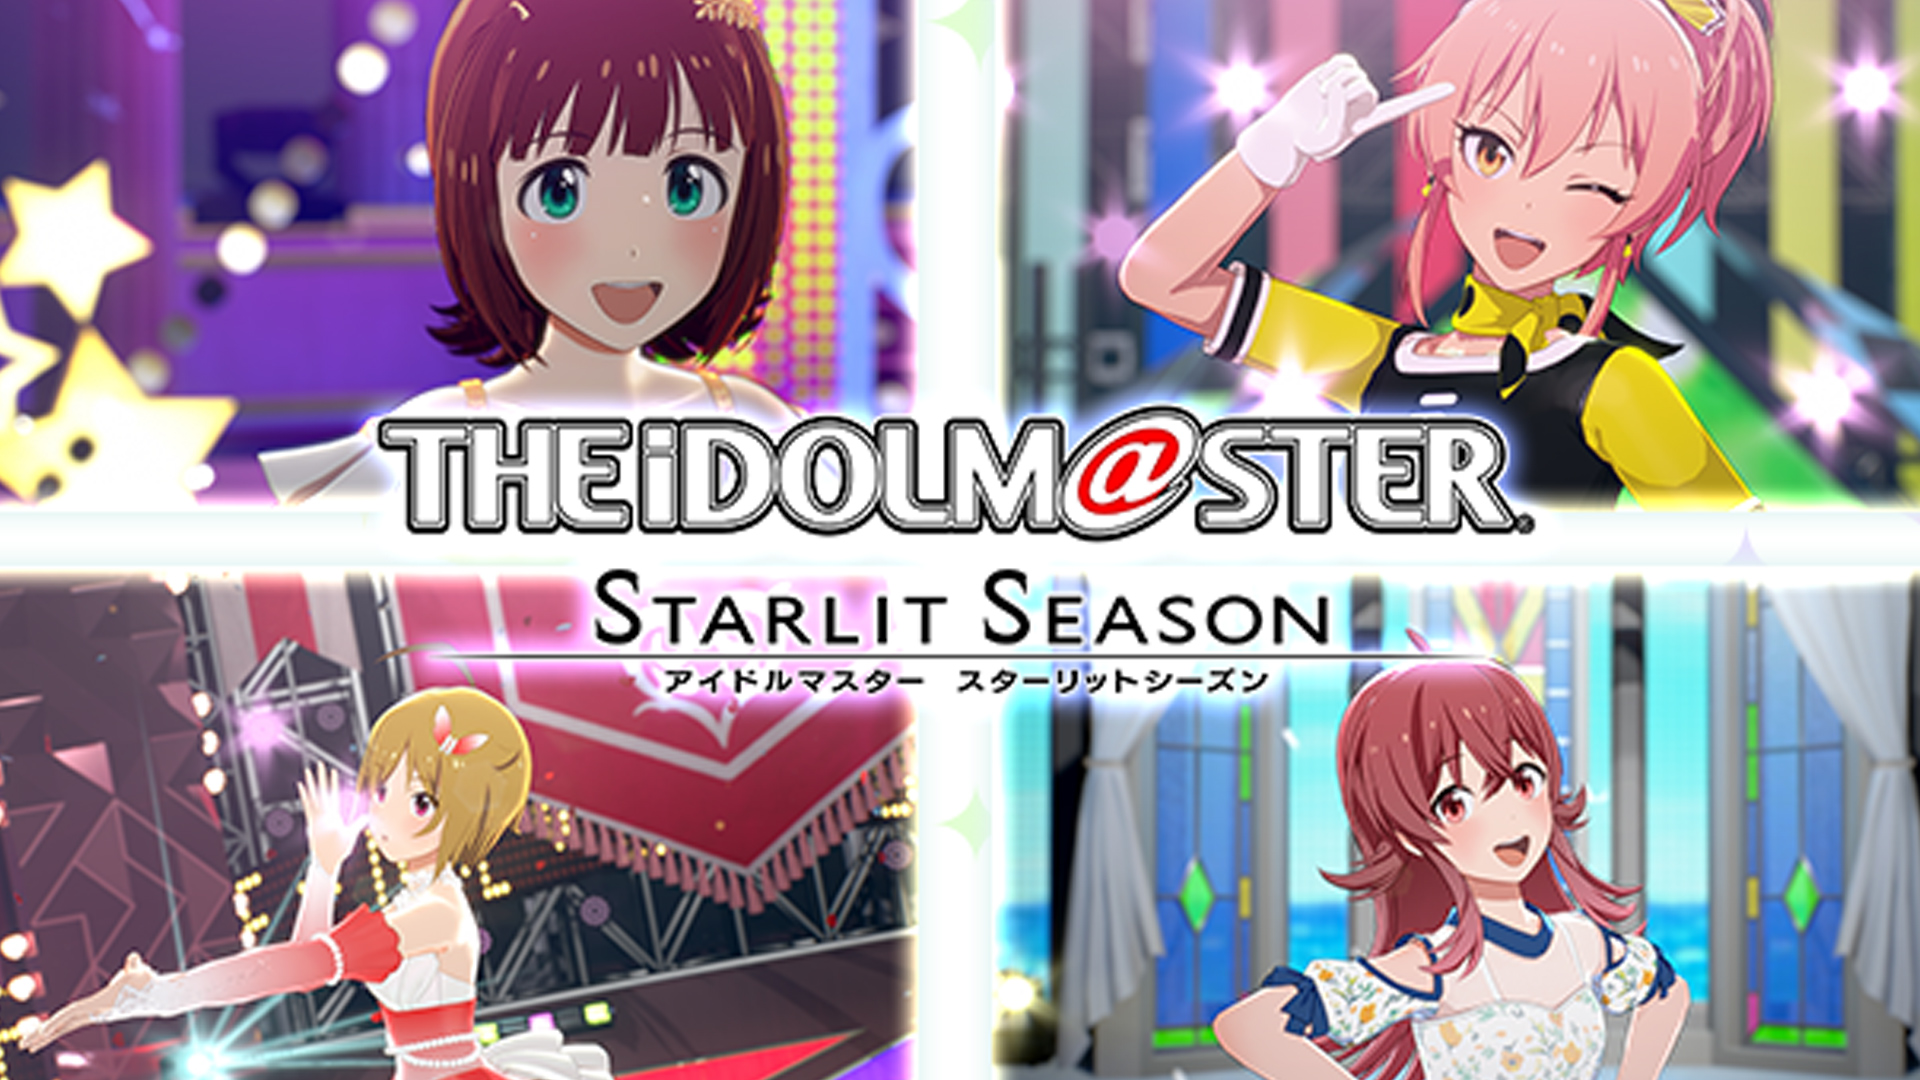 kalorie journalist Af storm The Idolmaster: Starlit Season Announced for 2020 Release on PS4 and PC •  The Mako Reactor